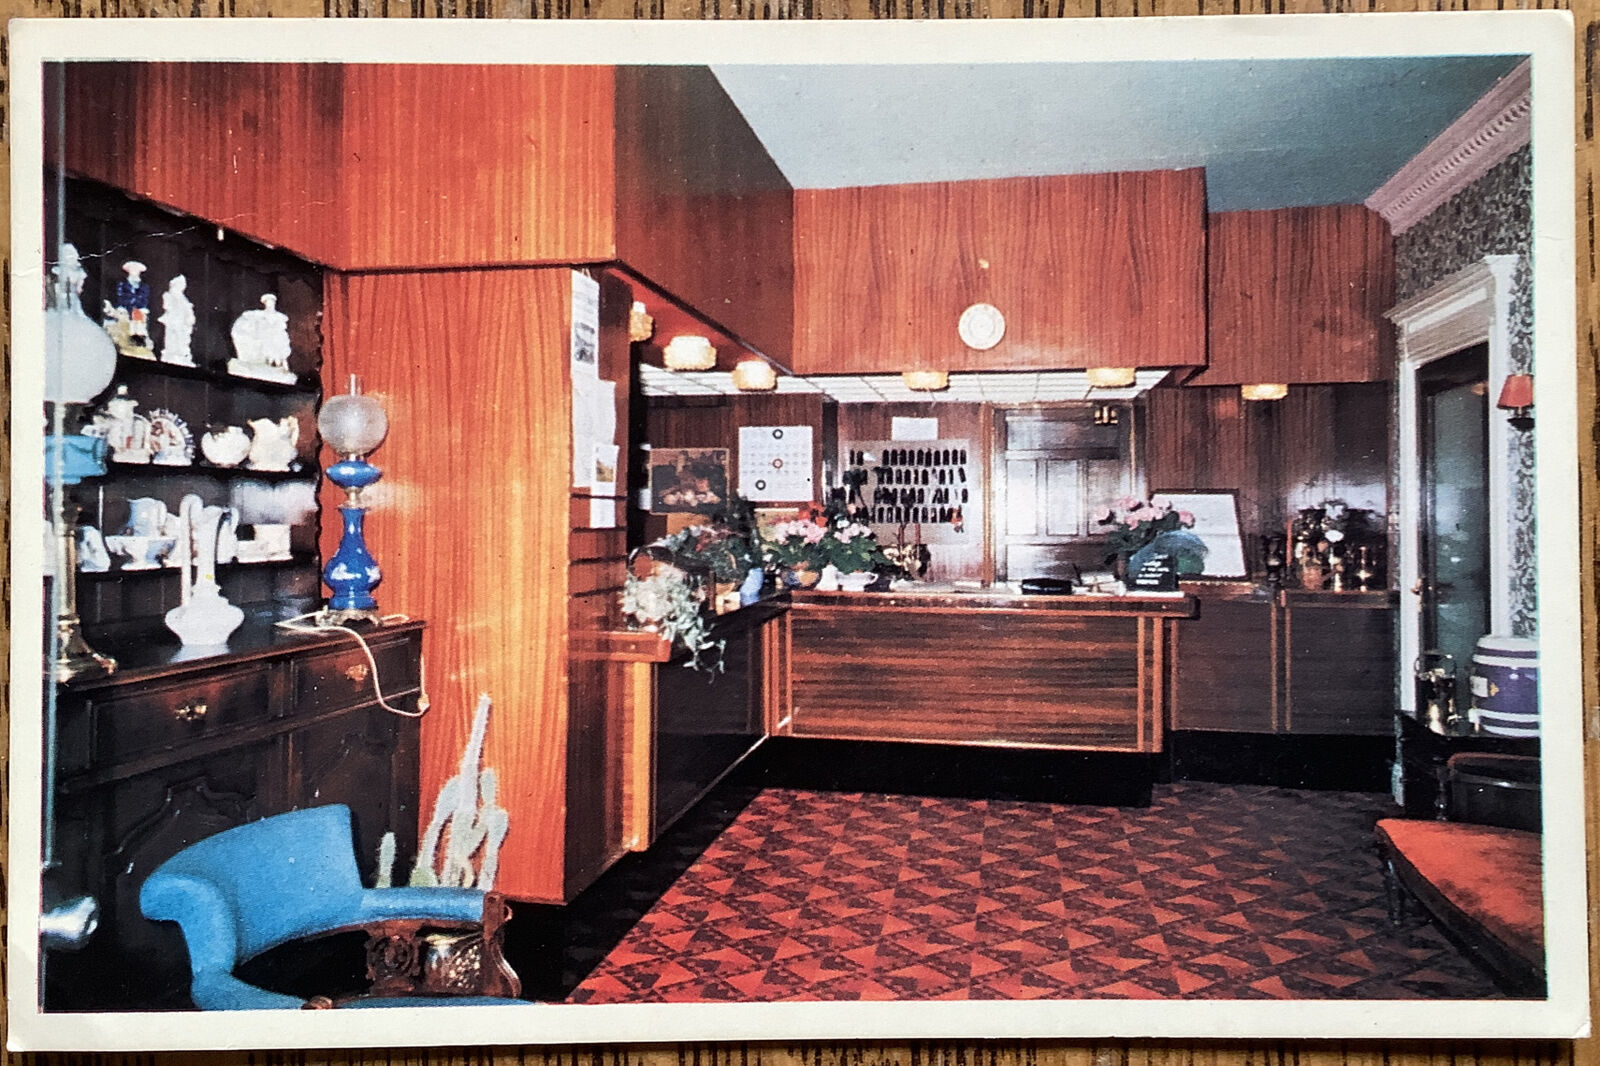 House Clearance - Penrith Clifton Hill Hotel Motel Reception Area 1982 Vintage Service